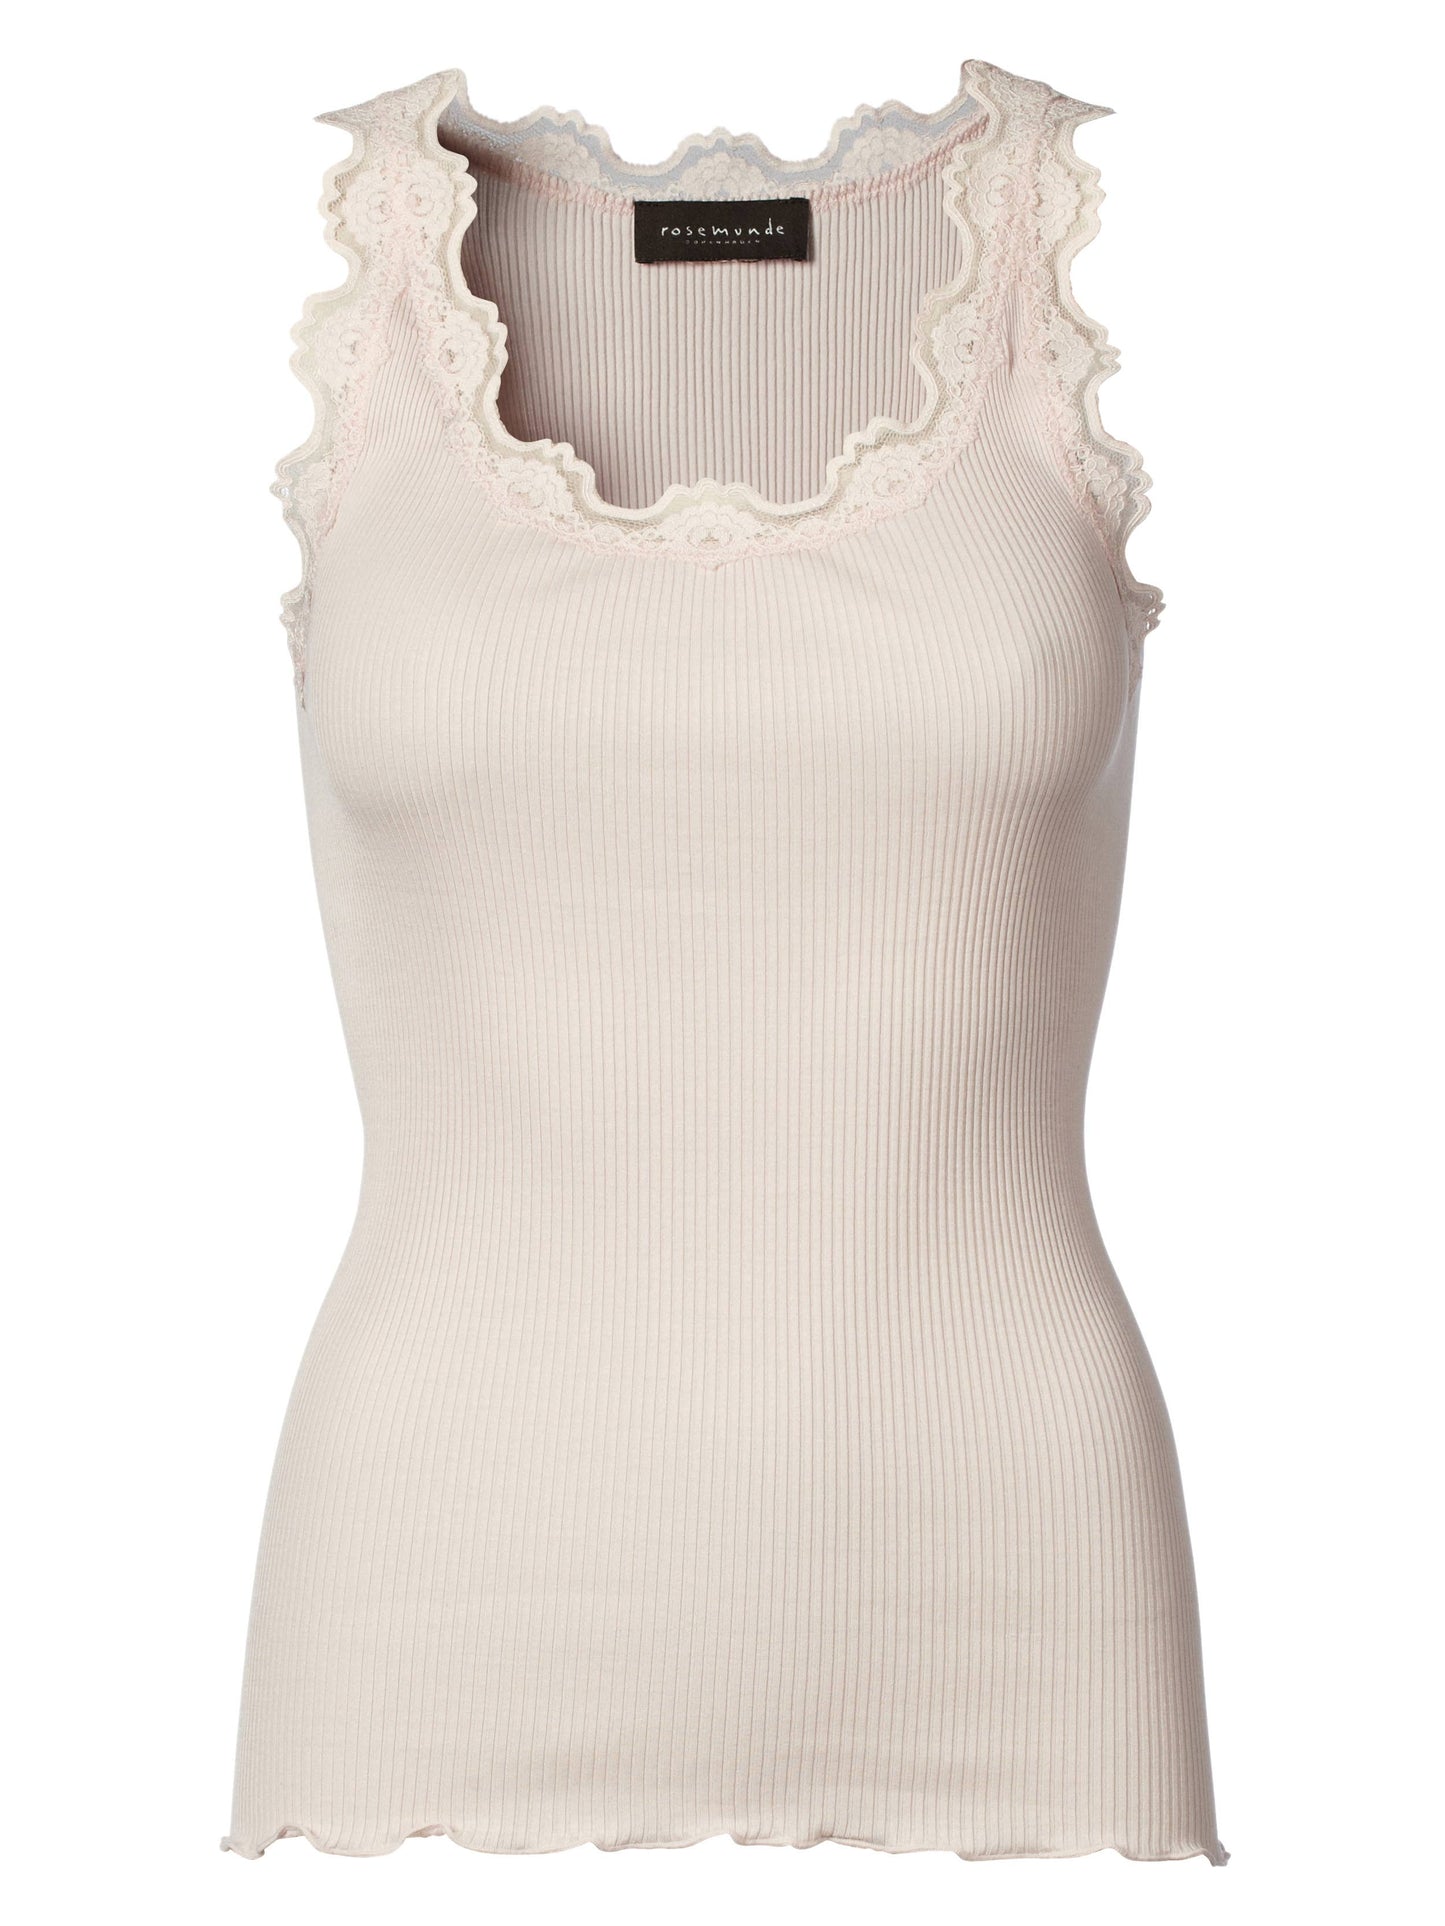 Iconic Silk Top With Lace - Rosemunde